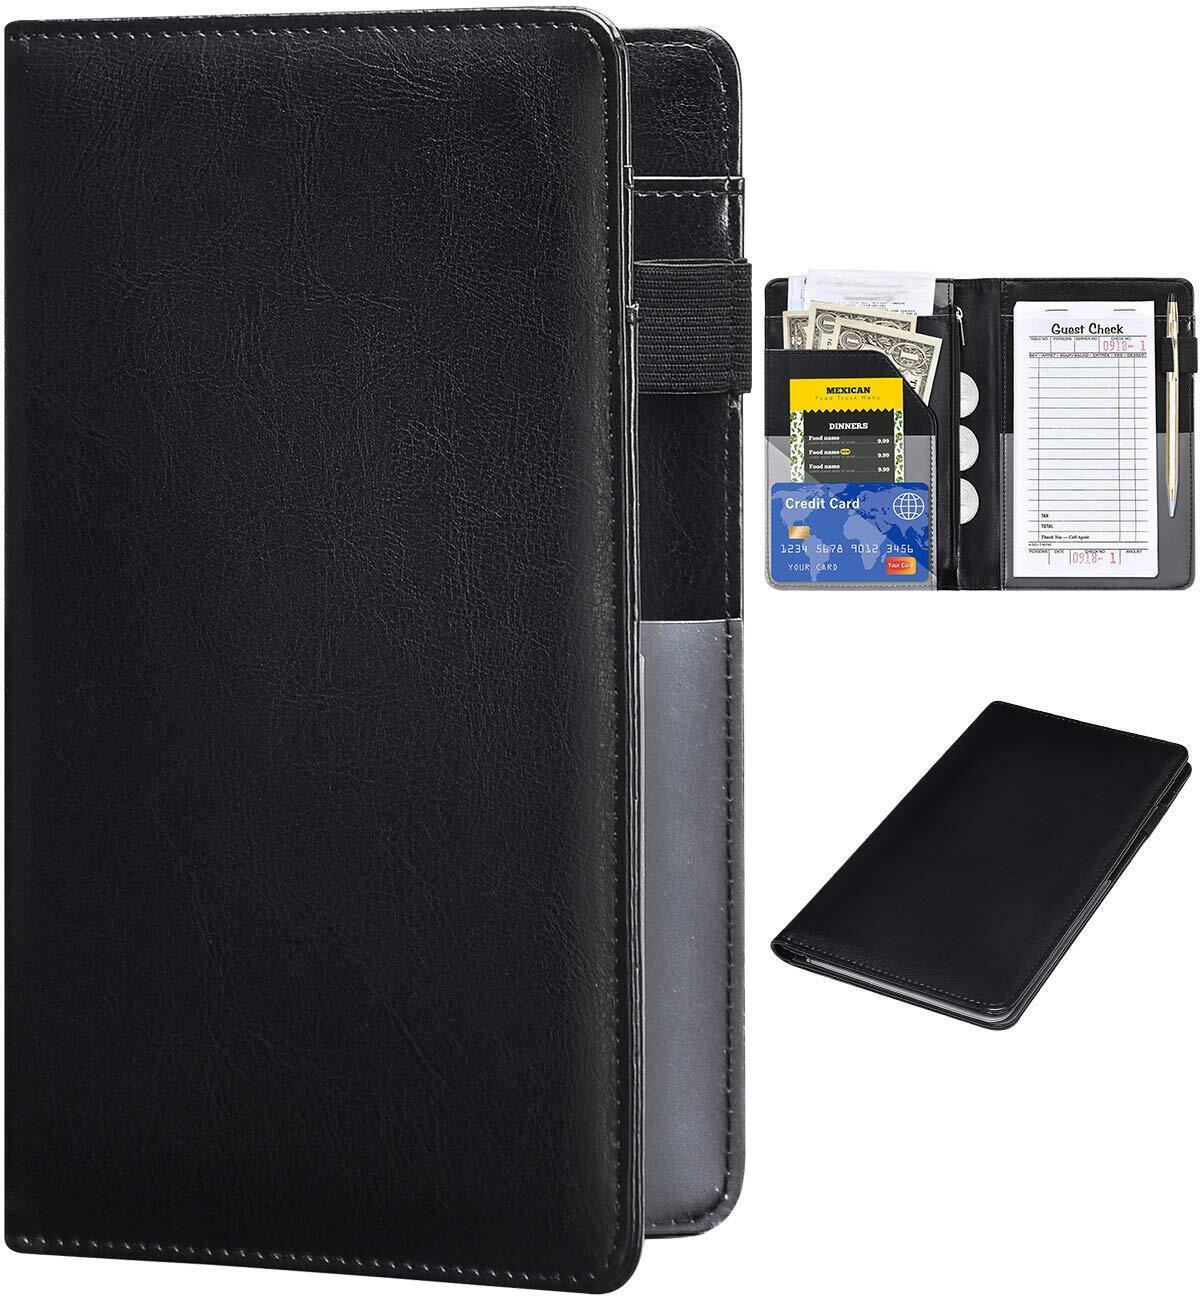 Eco-Friendly PU Leather Server Book - Durable, Practical for Waitress